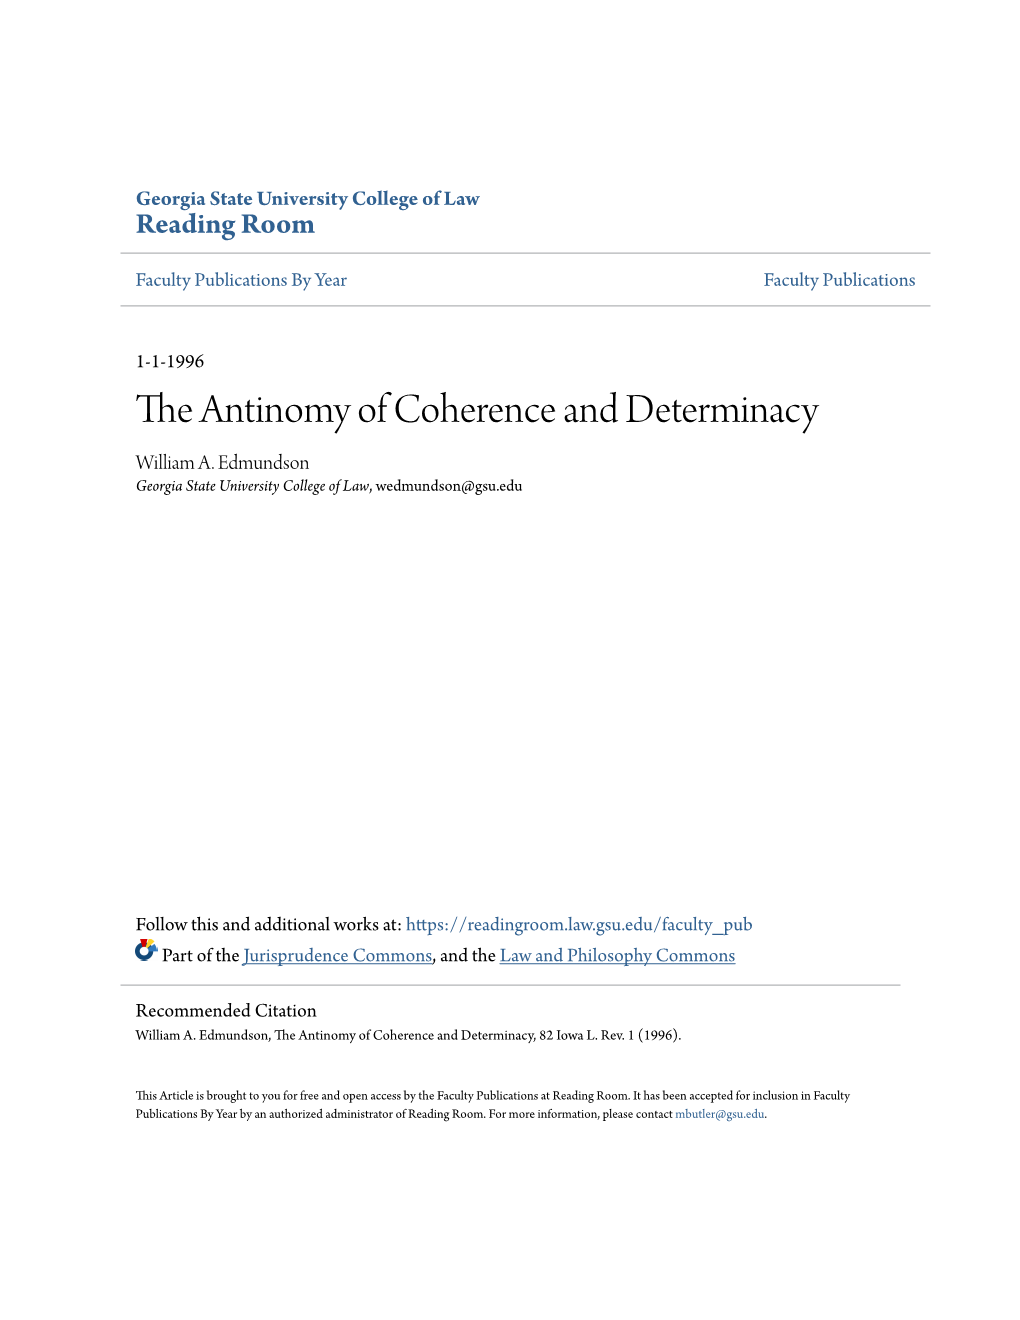 The Antinomy of Coherence and Determinacy William A